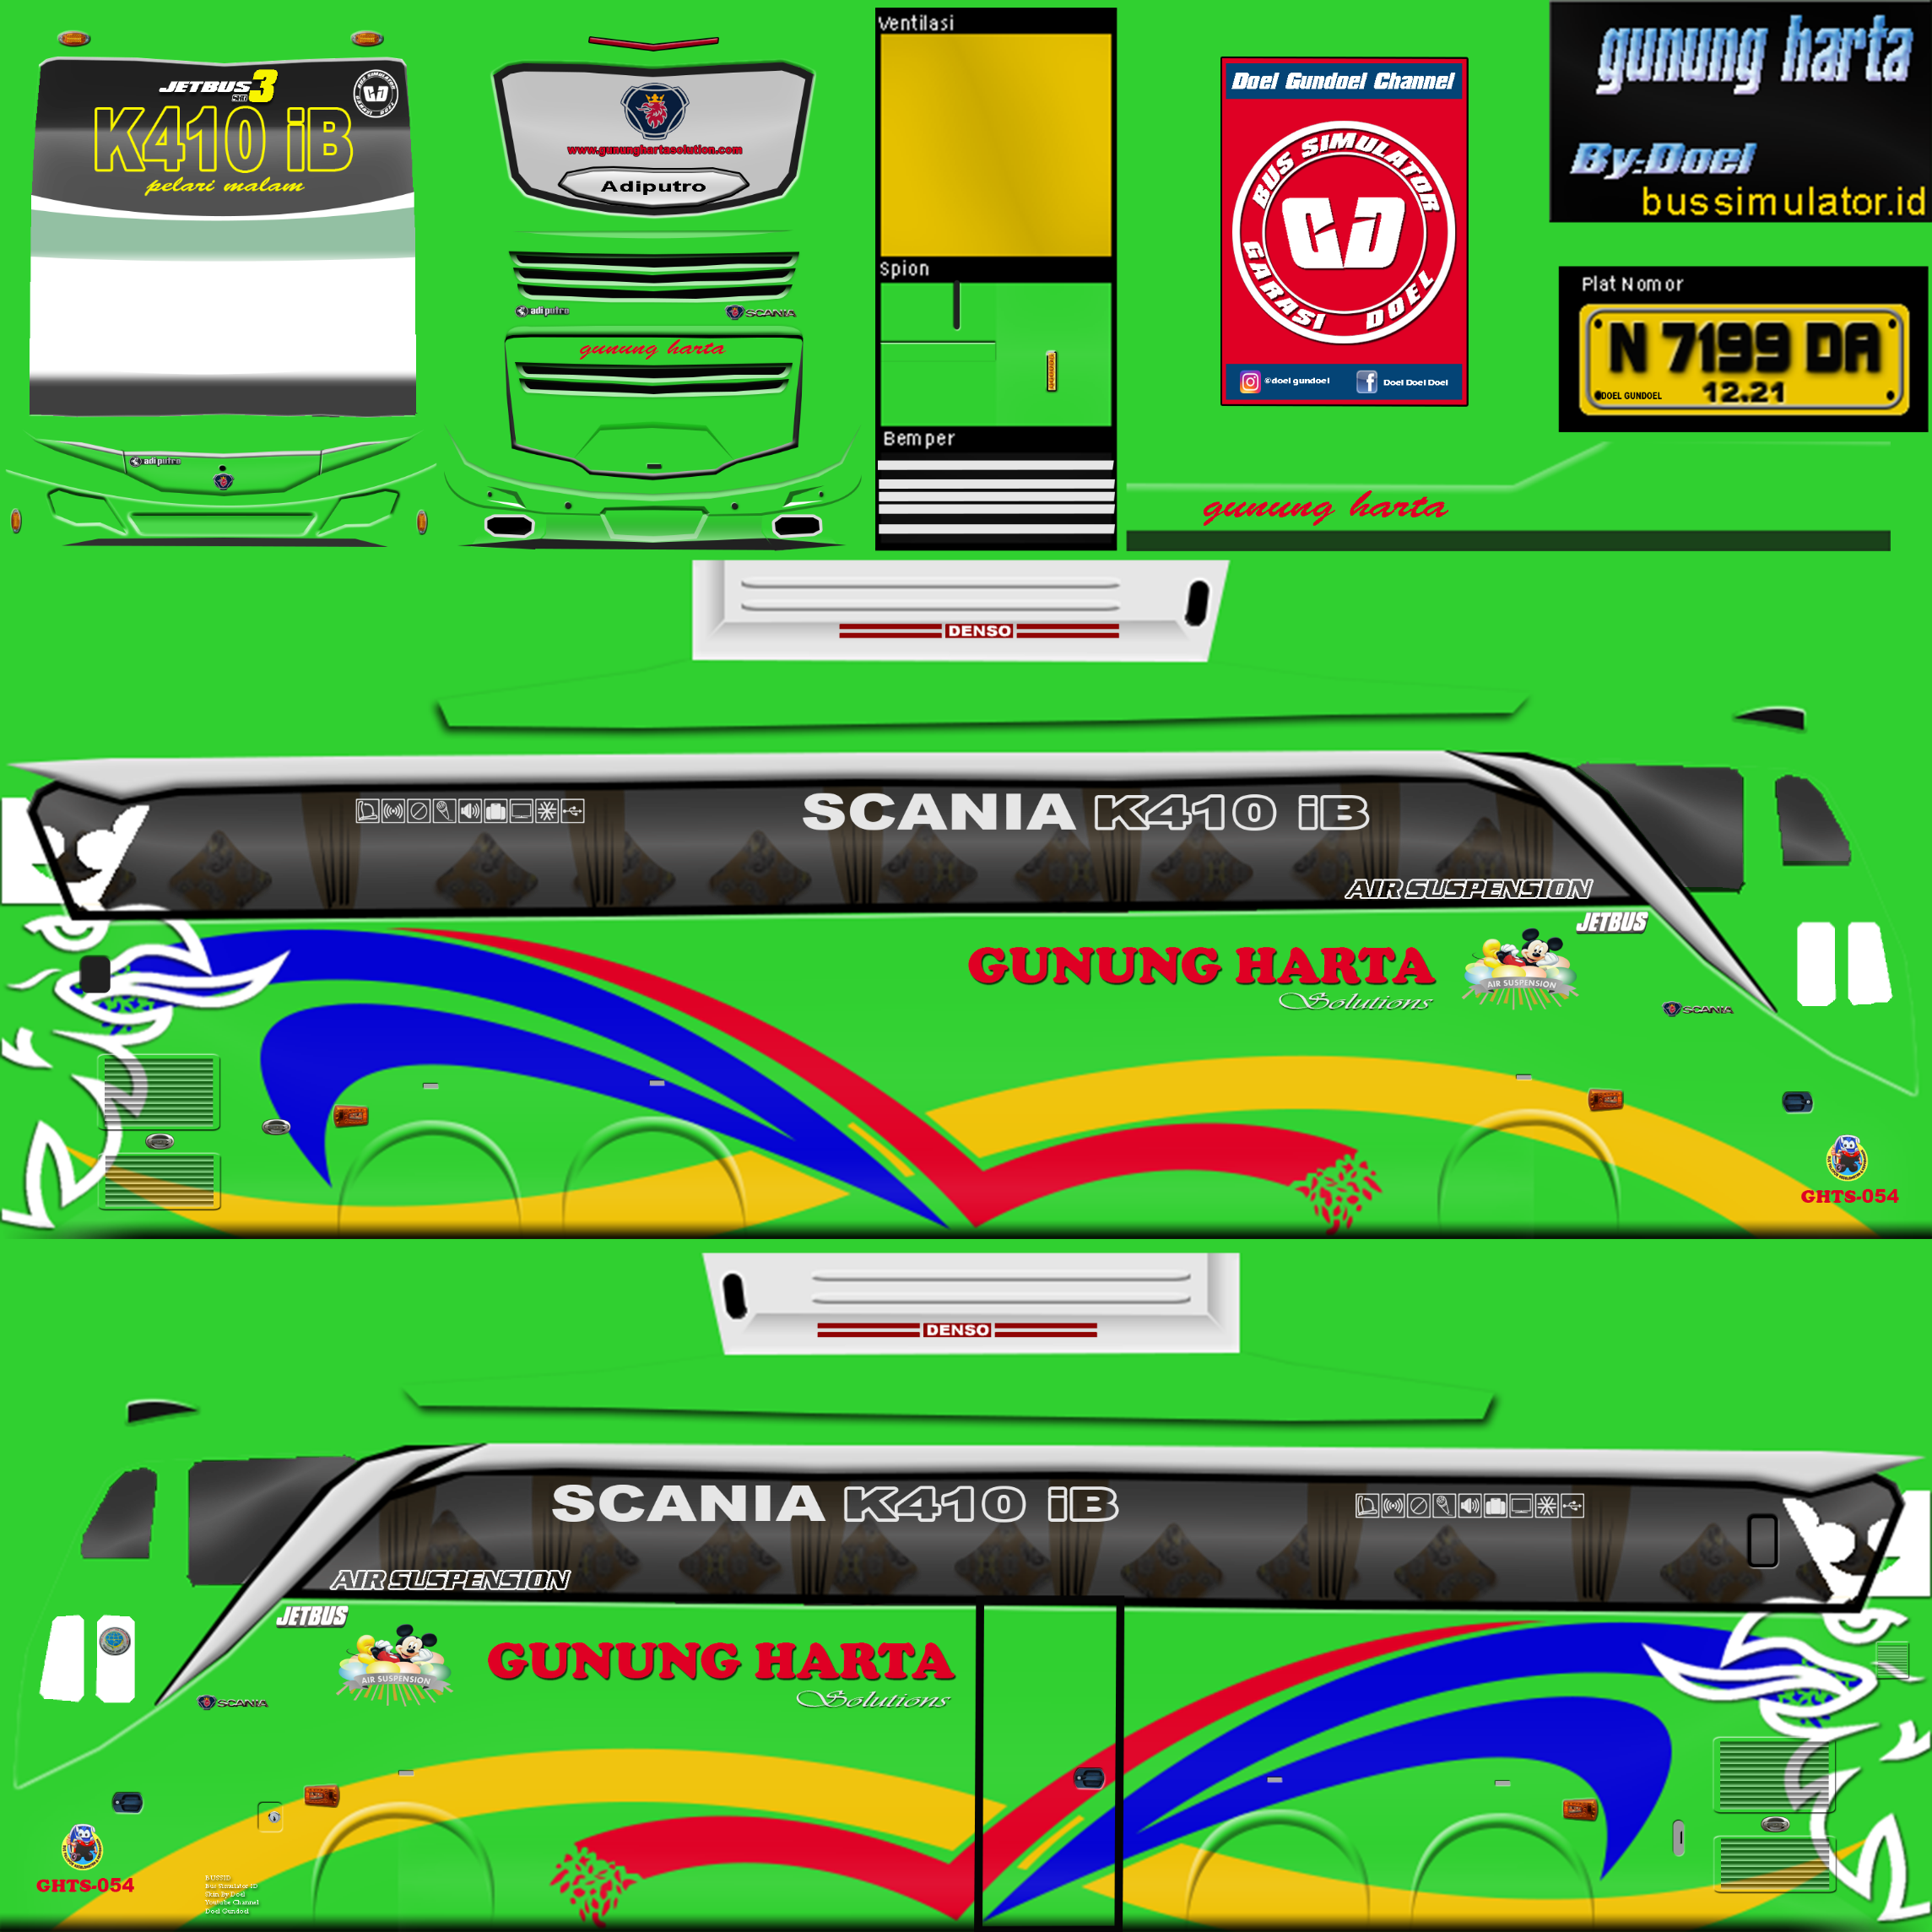 Stiker Denso Bussid Livery Bussid Photos Facebook Selecting The Correct Version Will Make The Kumpulan Strobo Dan Stiker Bussid App Work Better Faster Use Less Danzaterapeuticalaserenachile